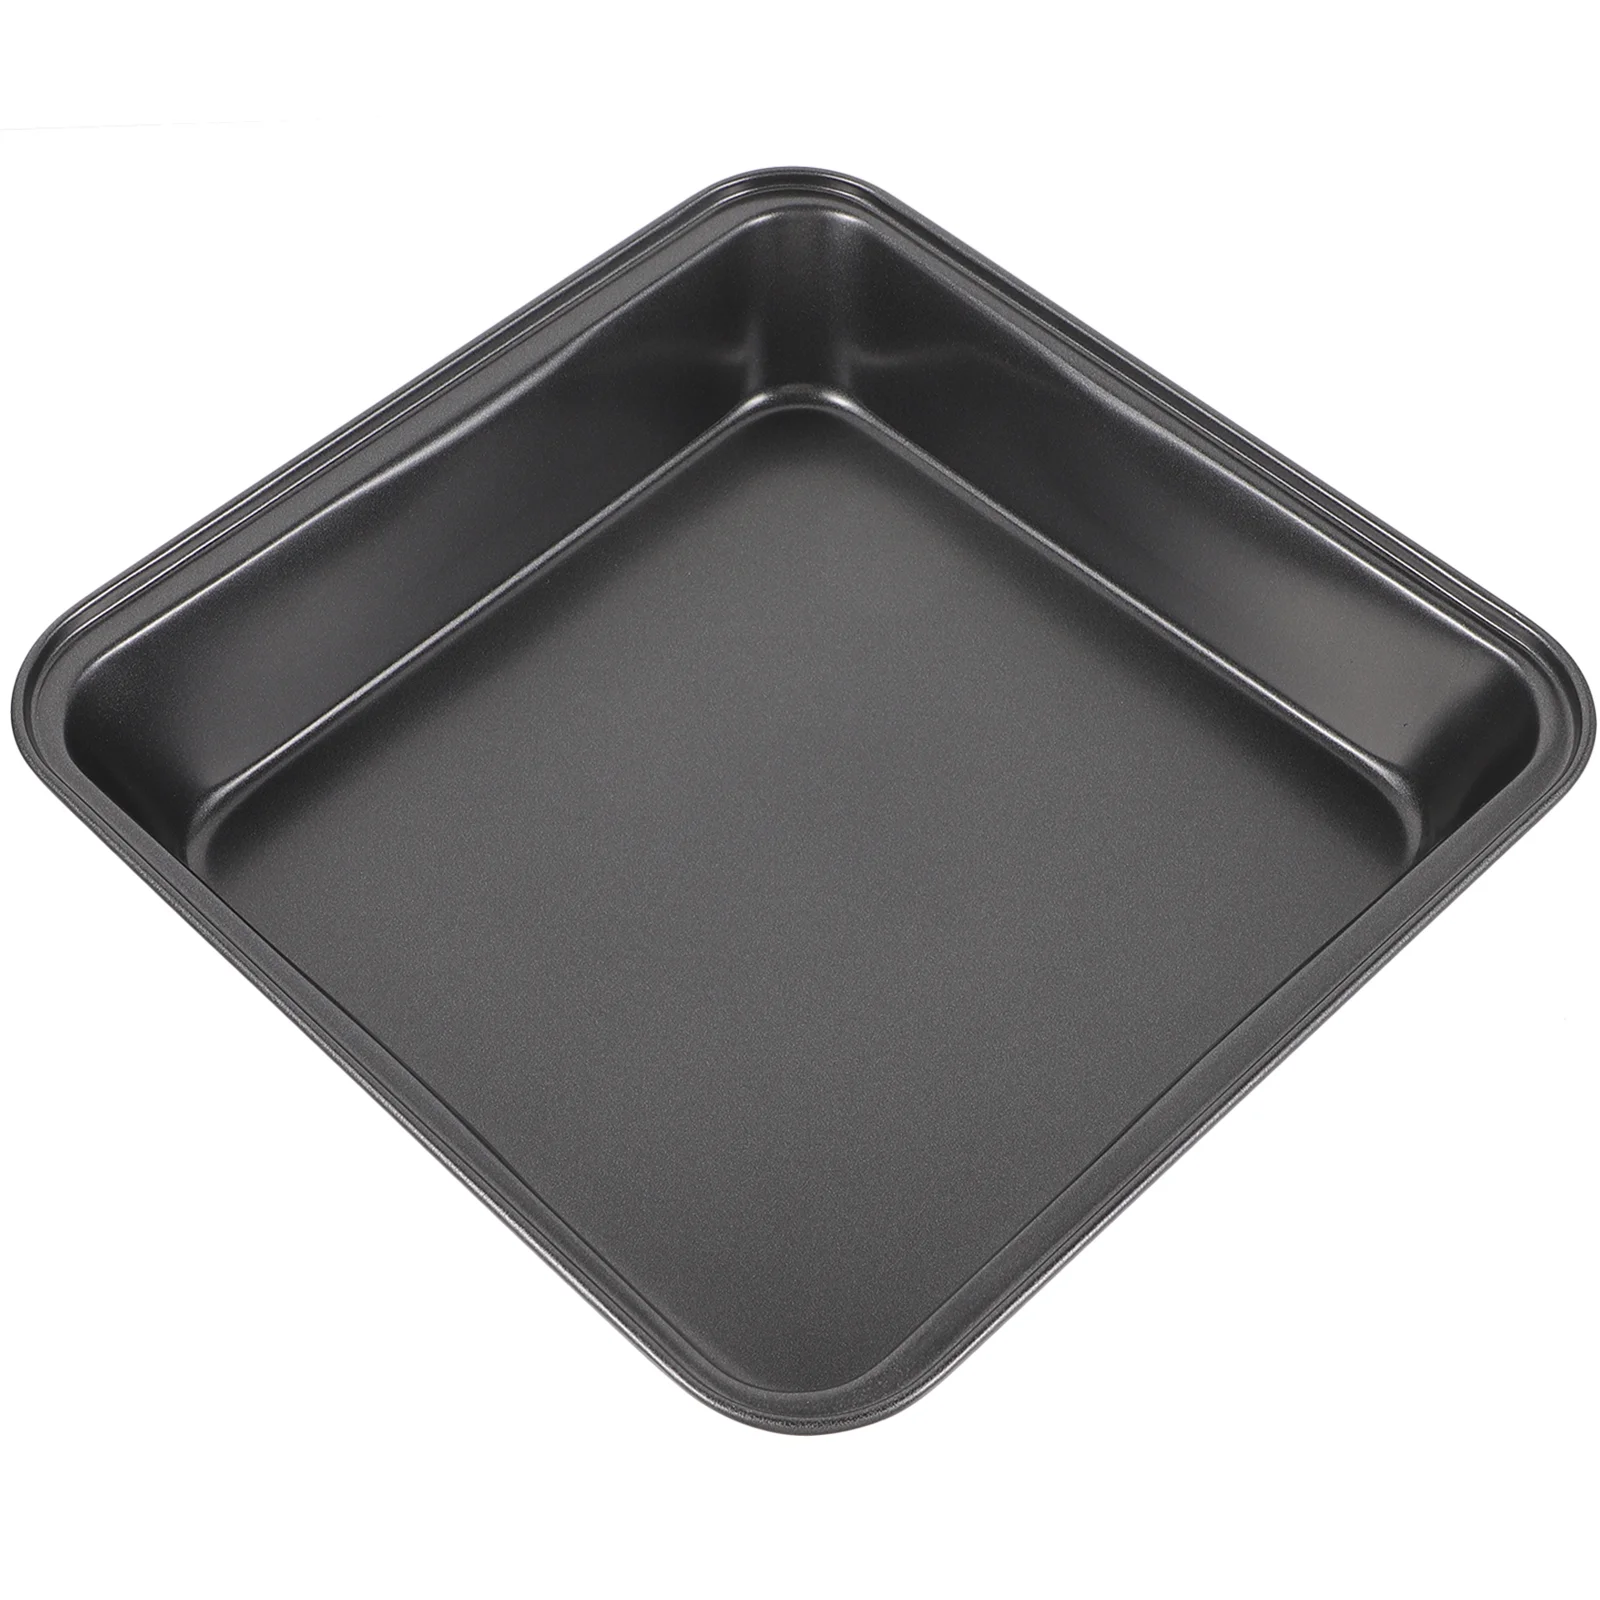 

Oven Tray Large Pizza Pan Pasta Plates Metal Design Baking Bakeware Pans Appetizer Steel Carbon Food Banquet Barbecue Four